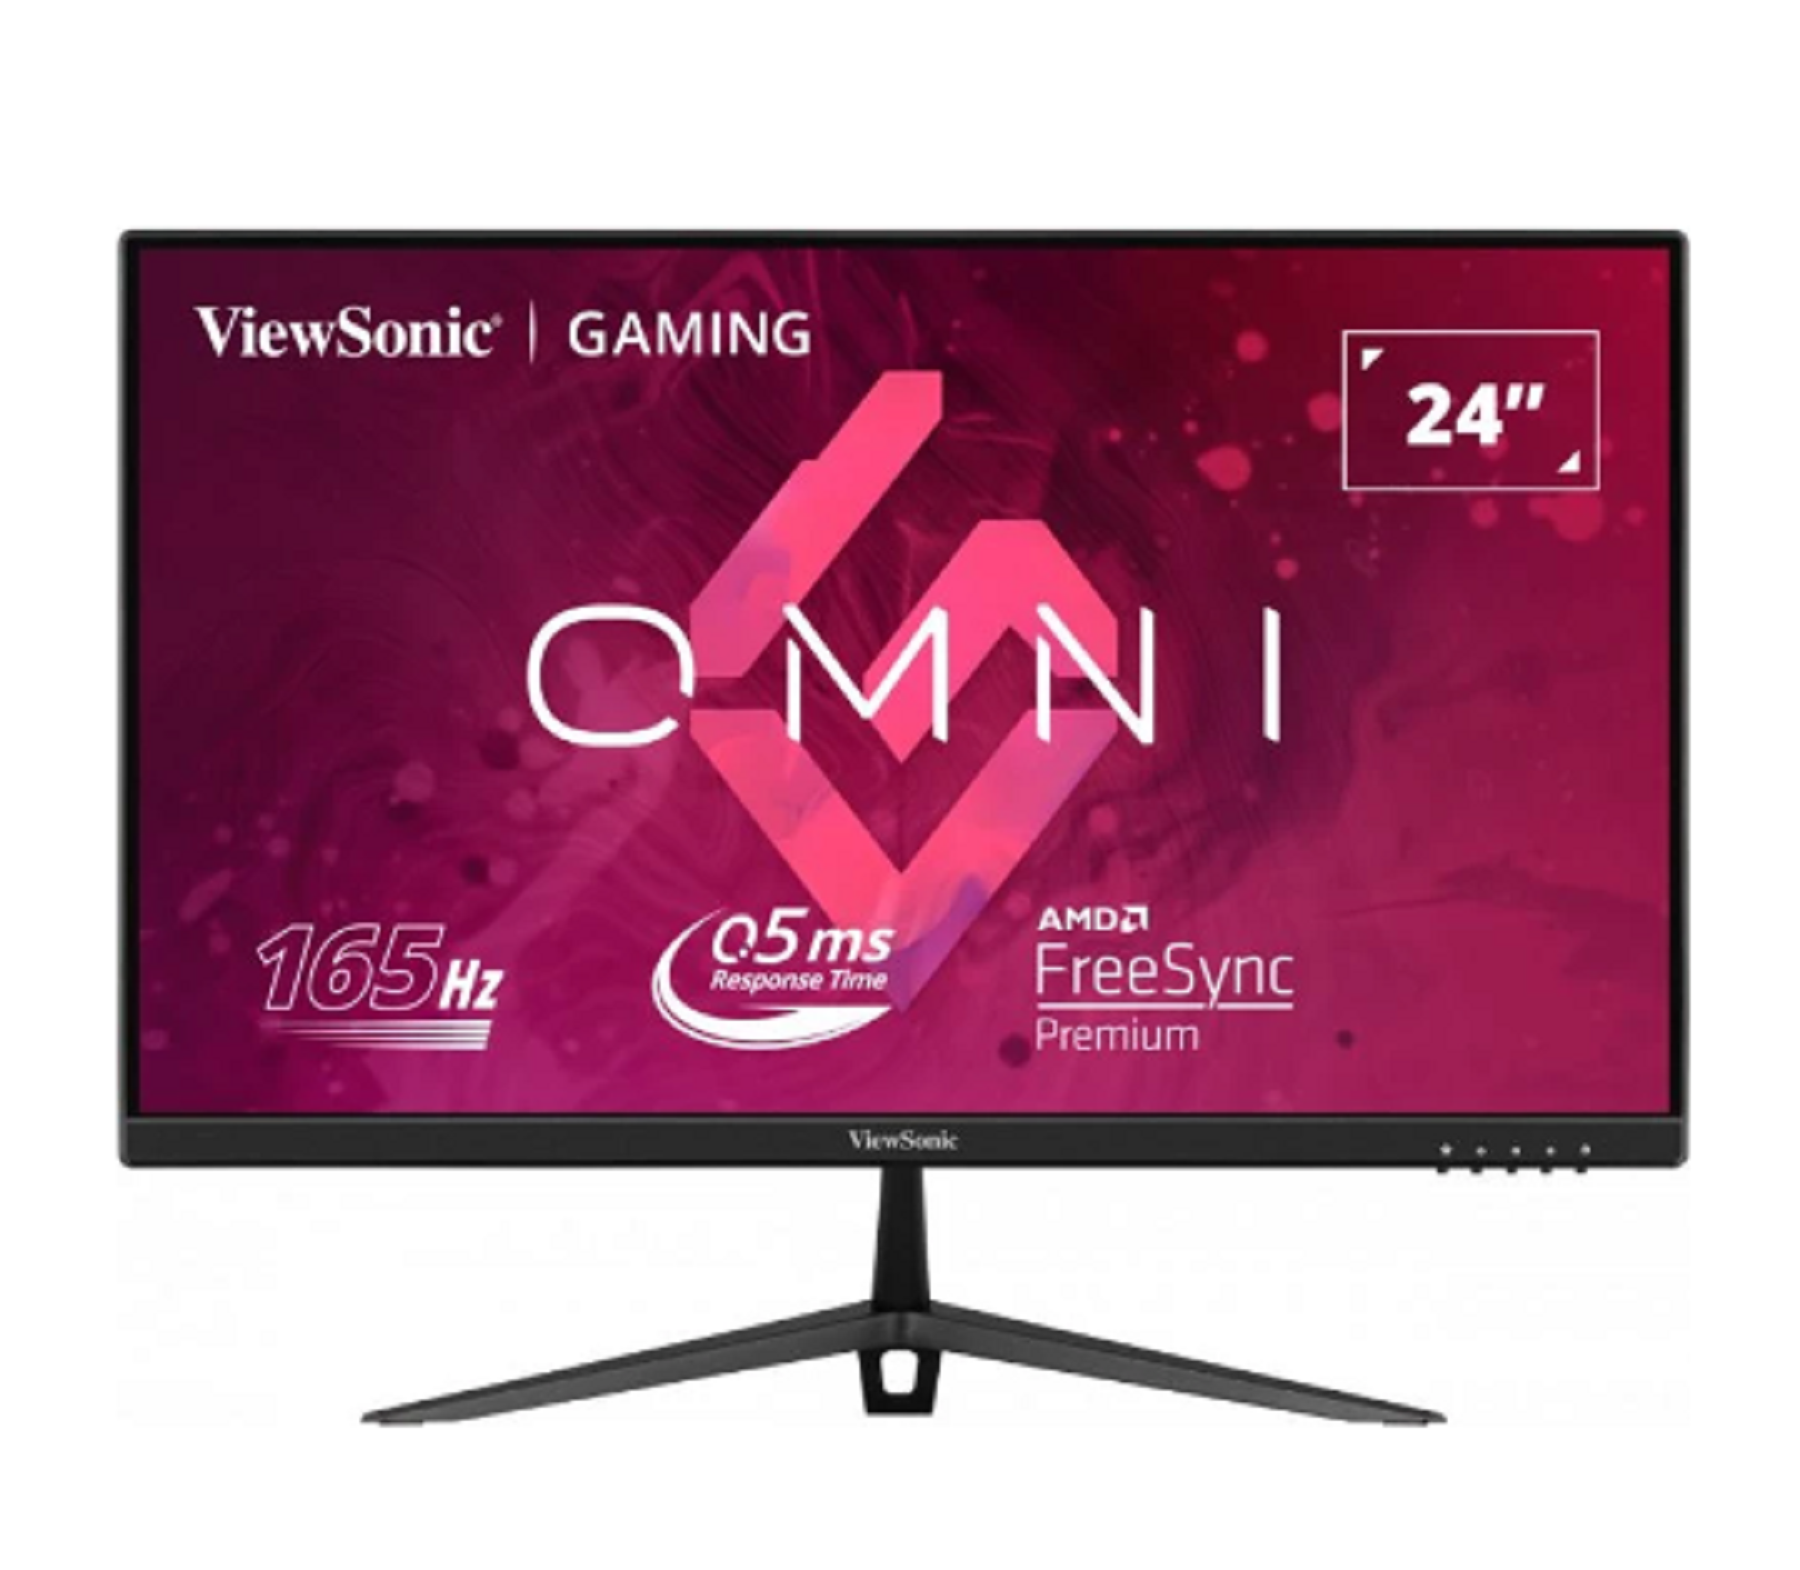 ViewSonic Introduces OMNI VX28 Series Monitors for the Casual Gamer